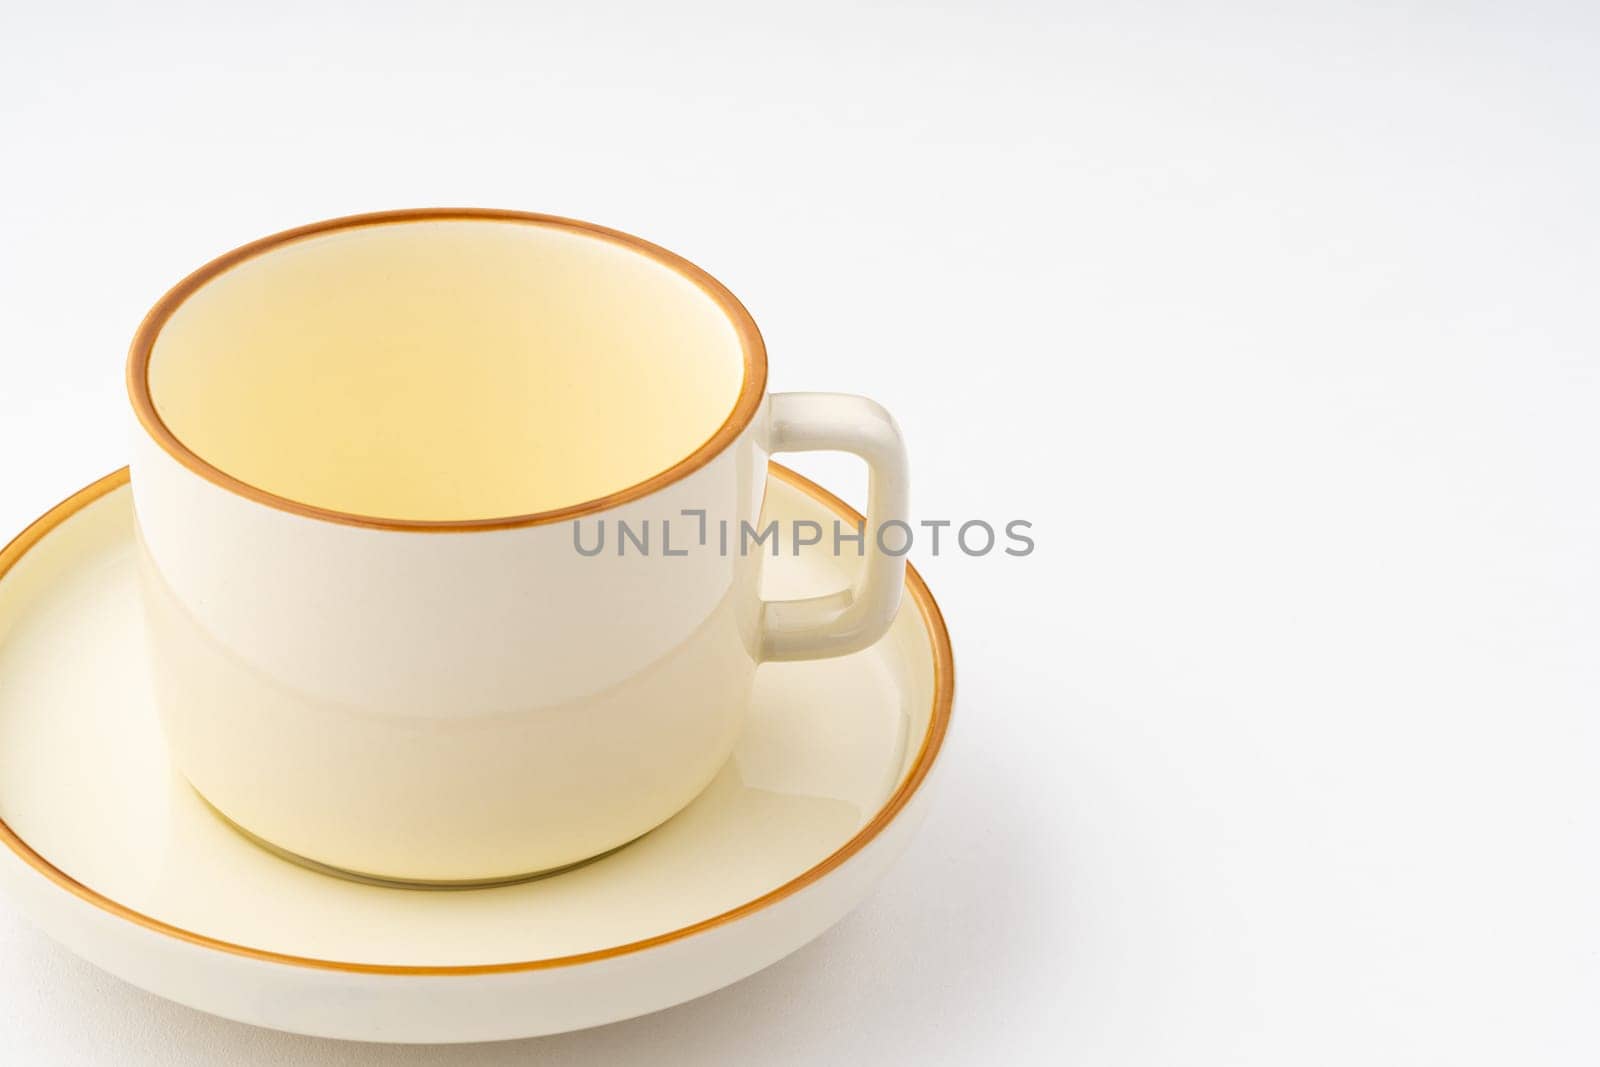 A set of white and brown ceramic plate and cup on a white background by A_Karim